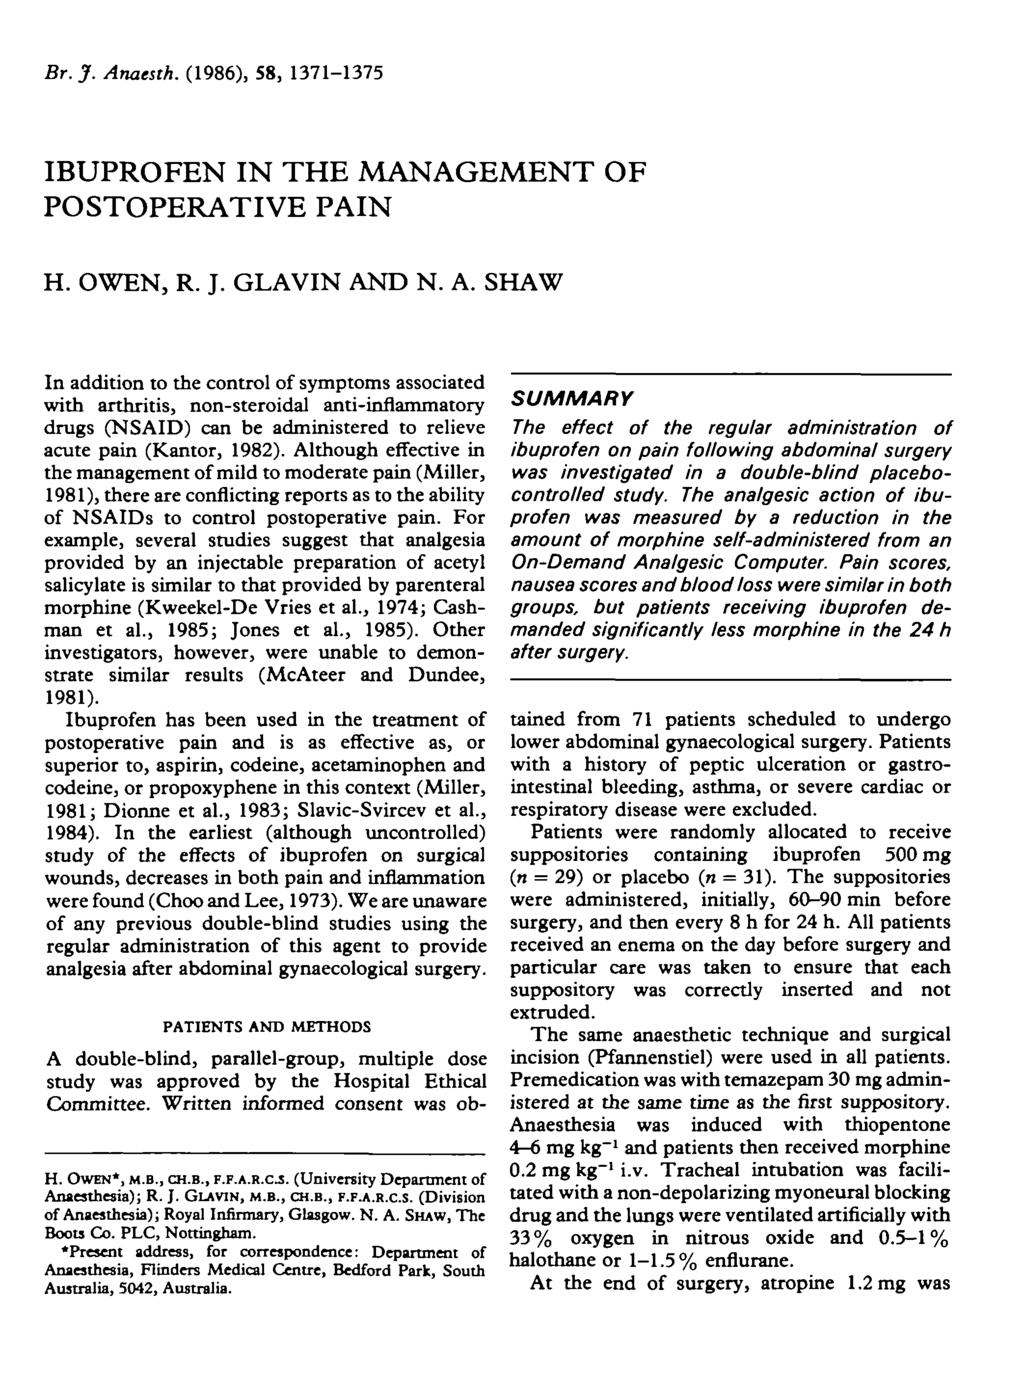 Br.J. Anaesth. (1986), 58, 171-175 IBUPROFEN IN THE MANAGEMENT OF POSTOPERATIVE PAIN H. OWEN, R. J. GLAVIN AND N. A. SHAW In addition to the control of symptoms associated with arthritis, non-steroidal anti-inflammatory drugs (NSAID) can be administered to relieve acute pain (Kantor, 1982).